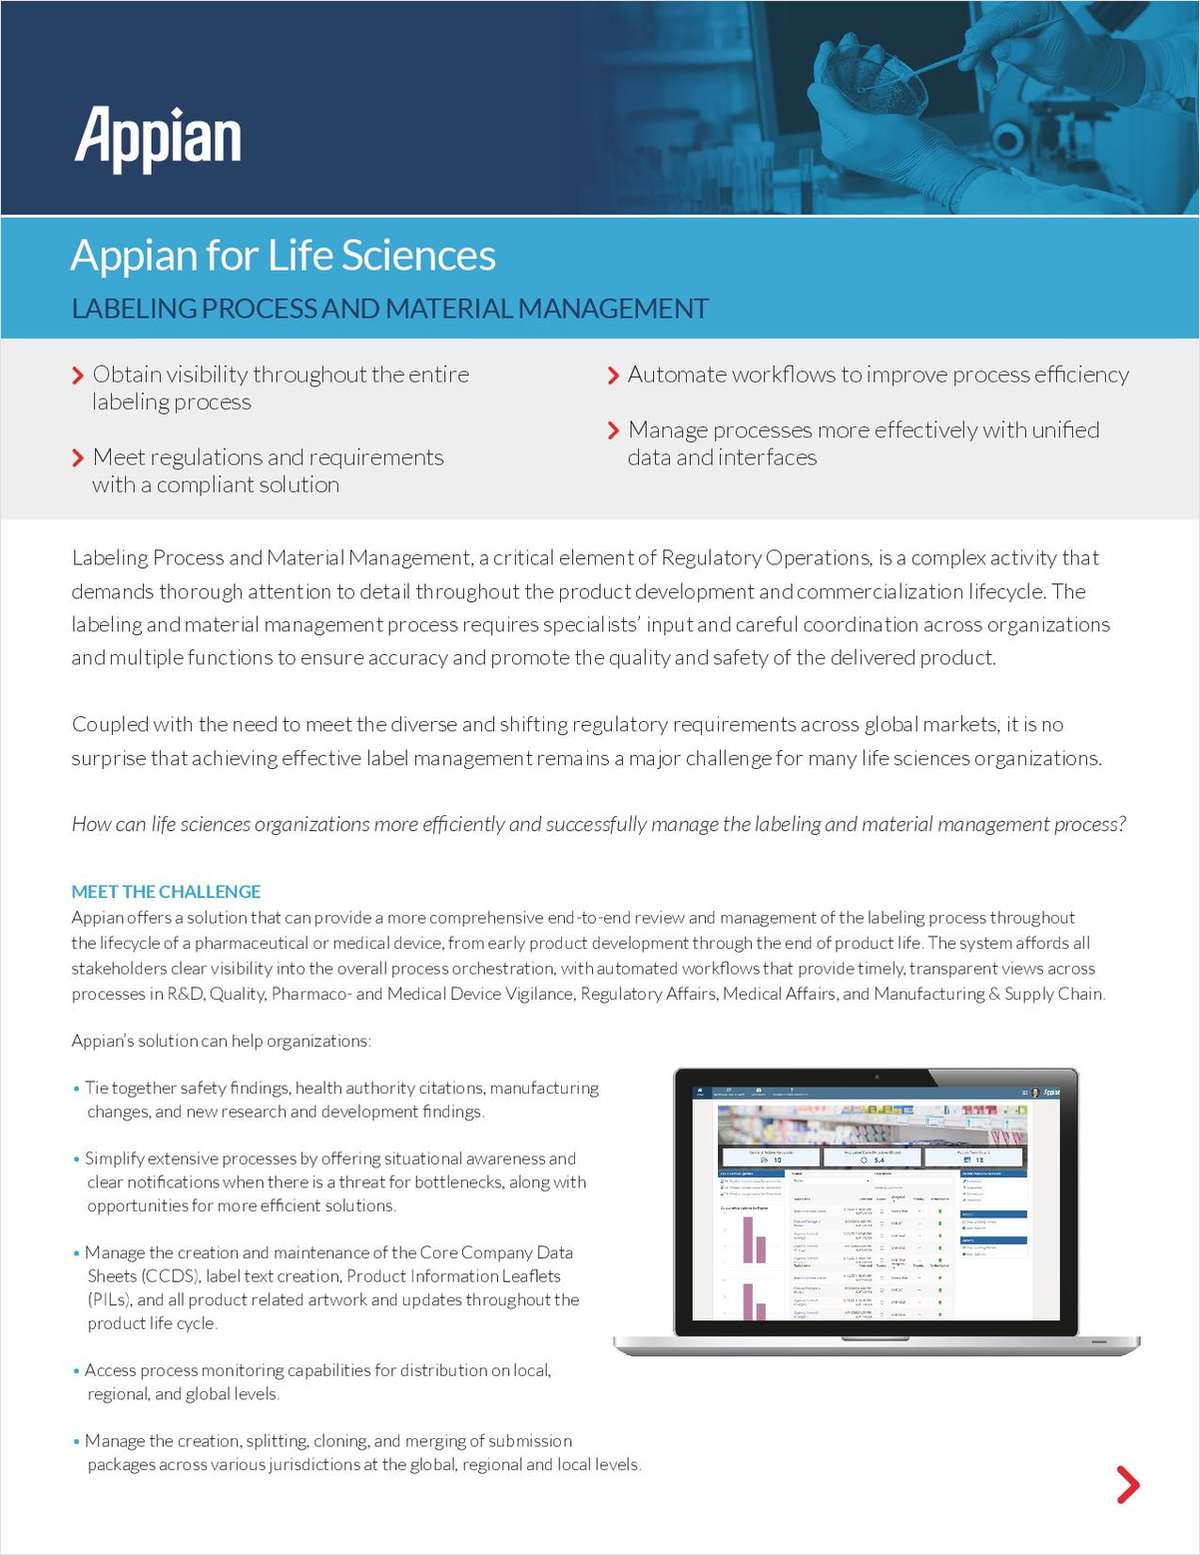 Appian for Life Sciences: Labeling Process and Material Management